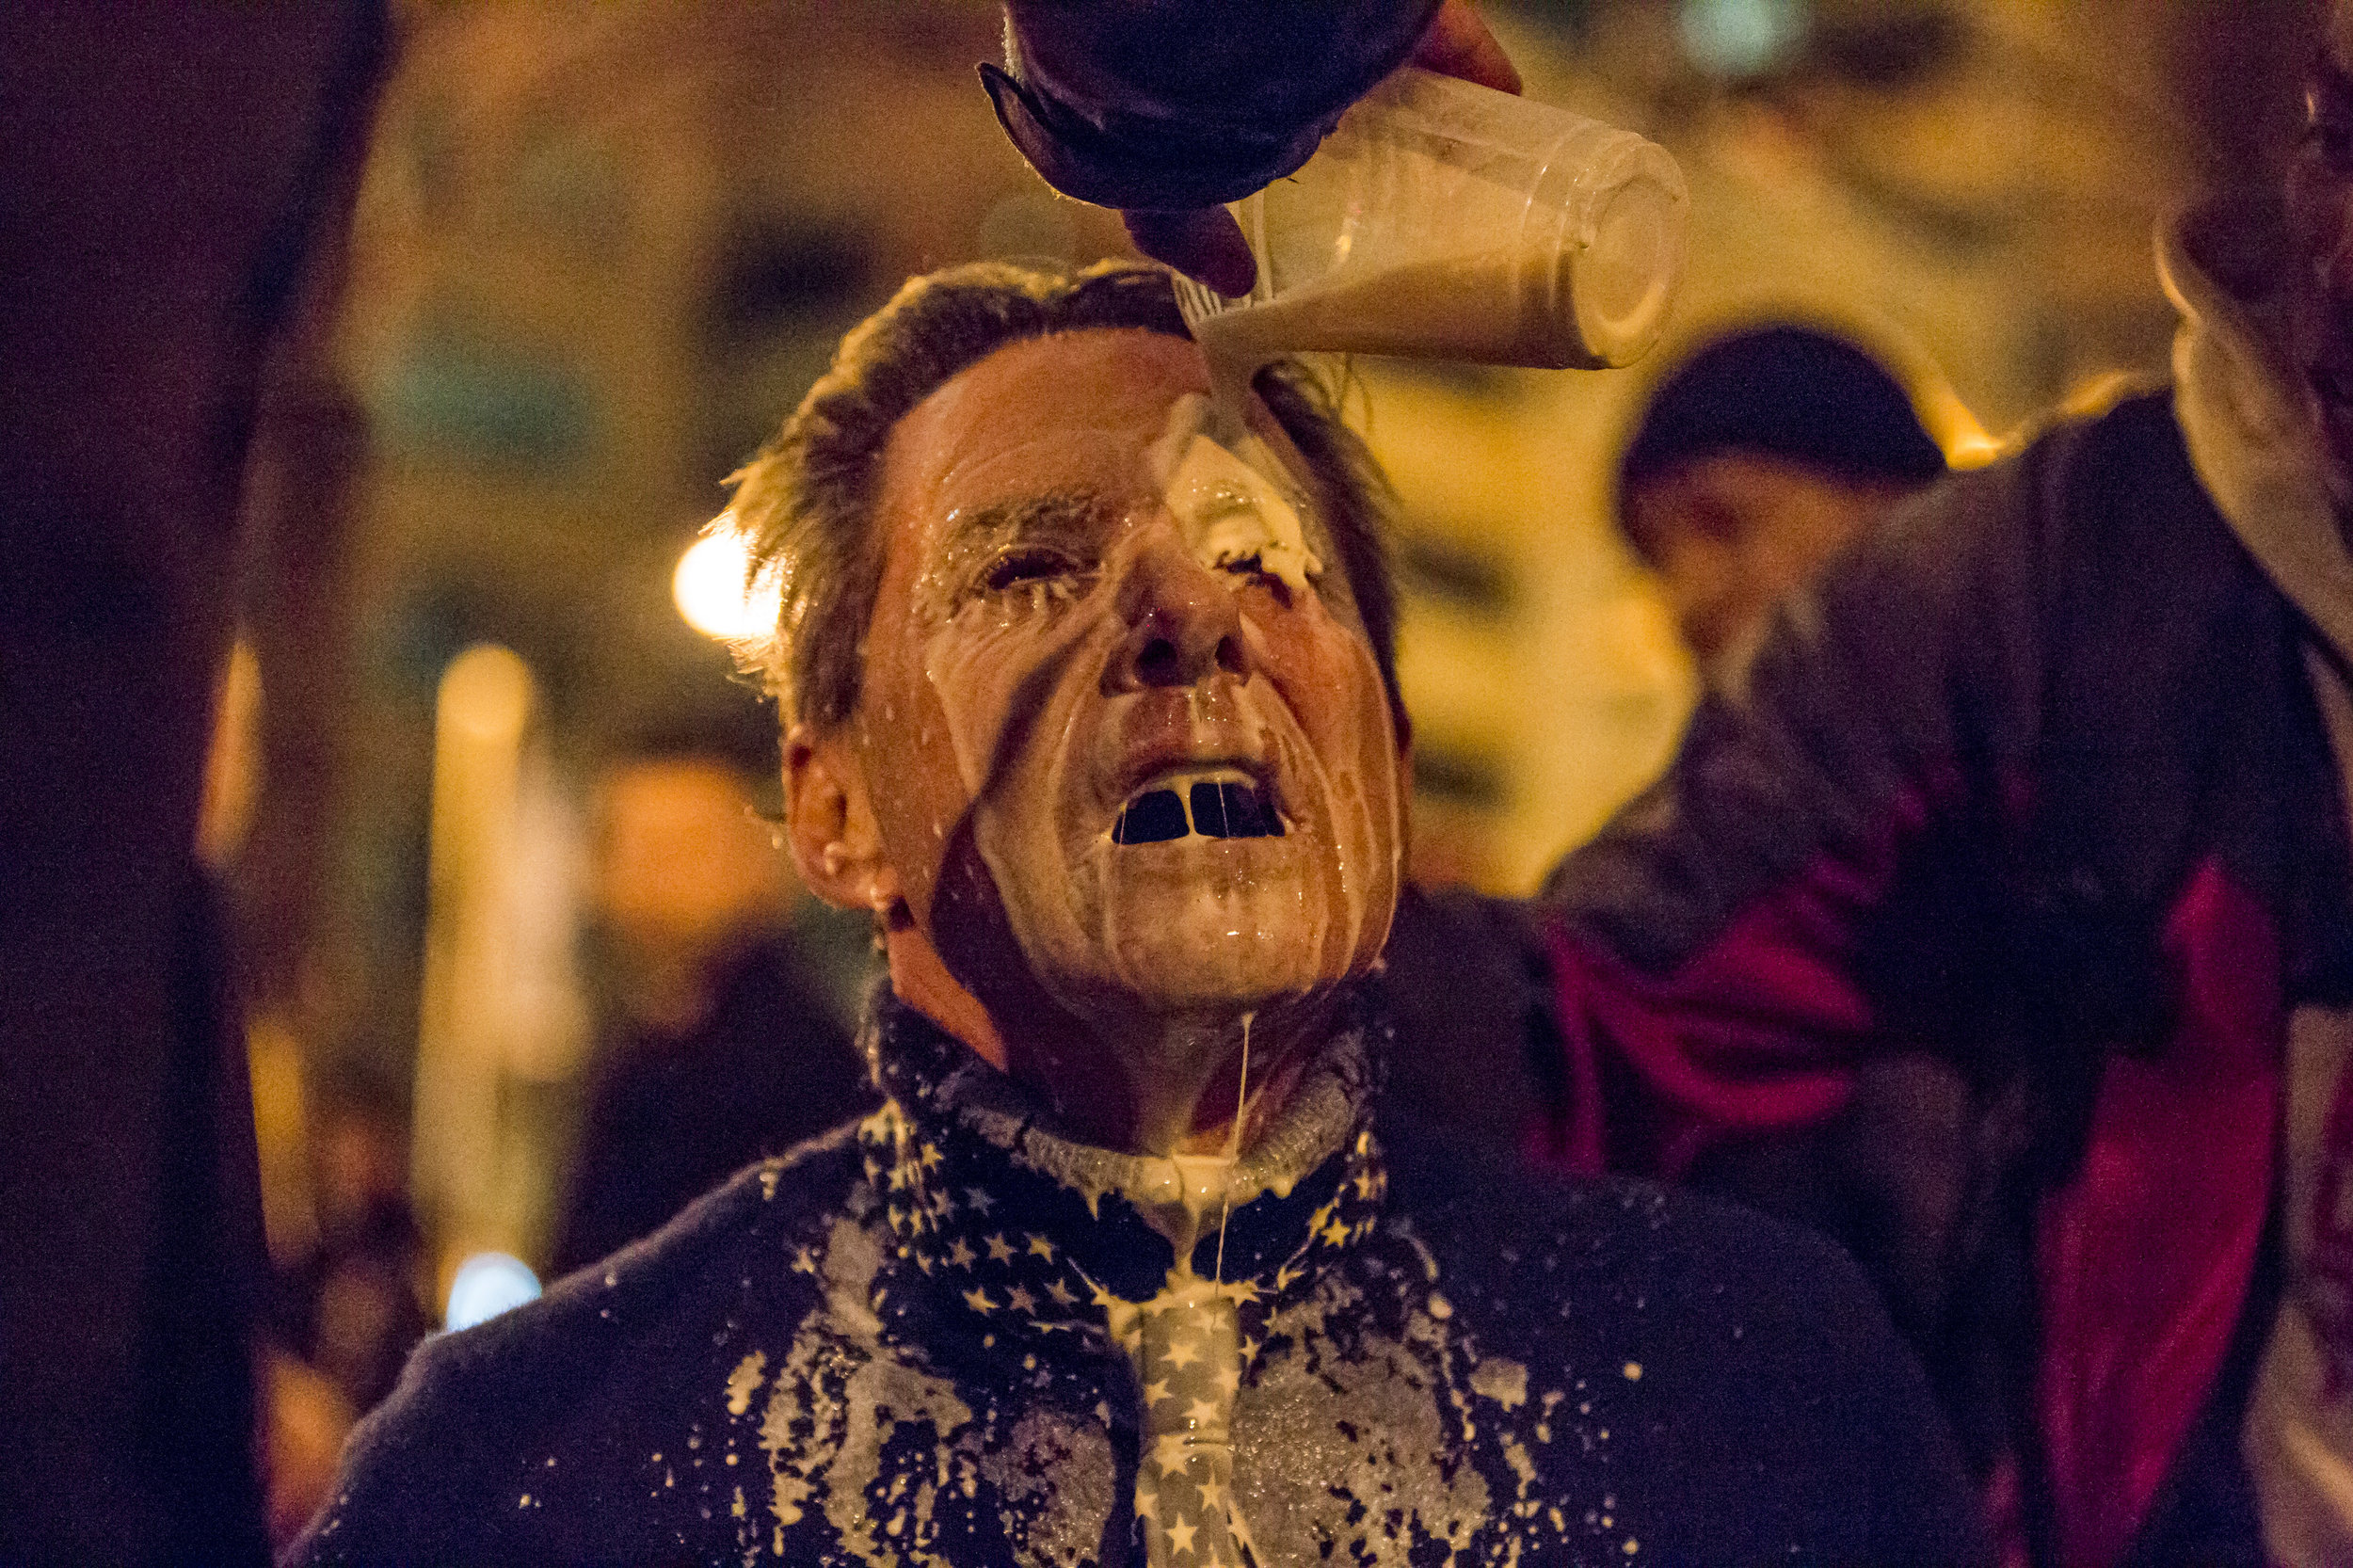  Protesters help pour milk into the eyes of Jeff Leonard, a Trump supporter from Las Vegas who was pepper sprayed. 